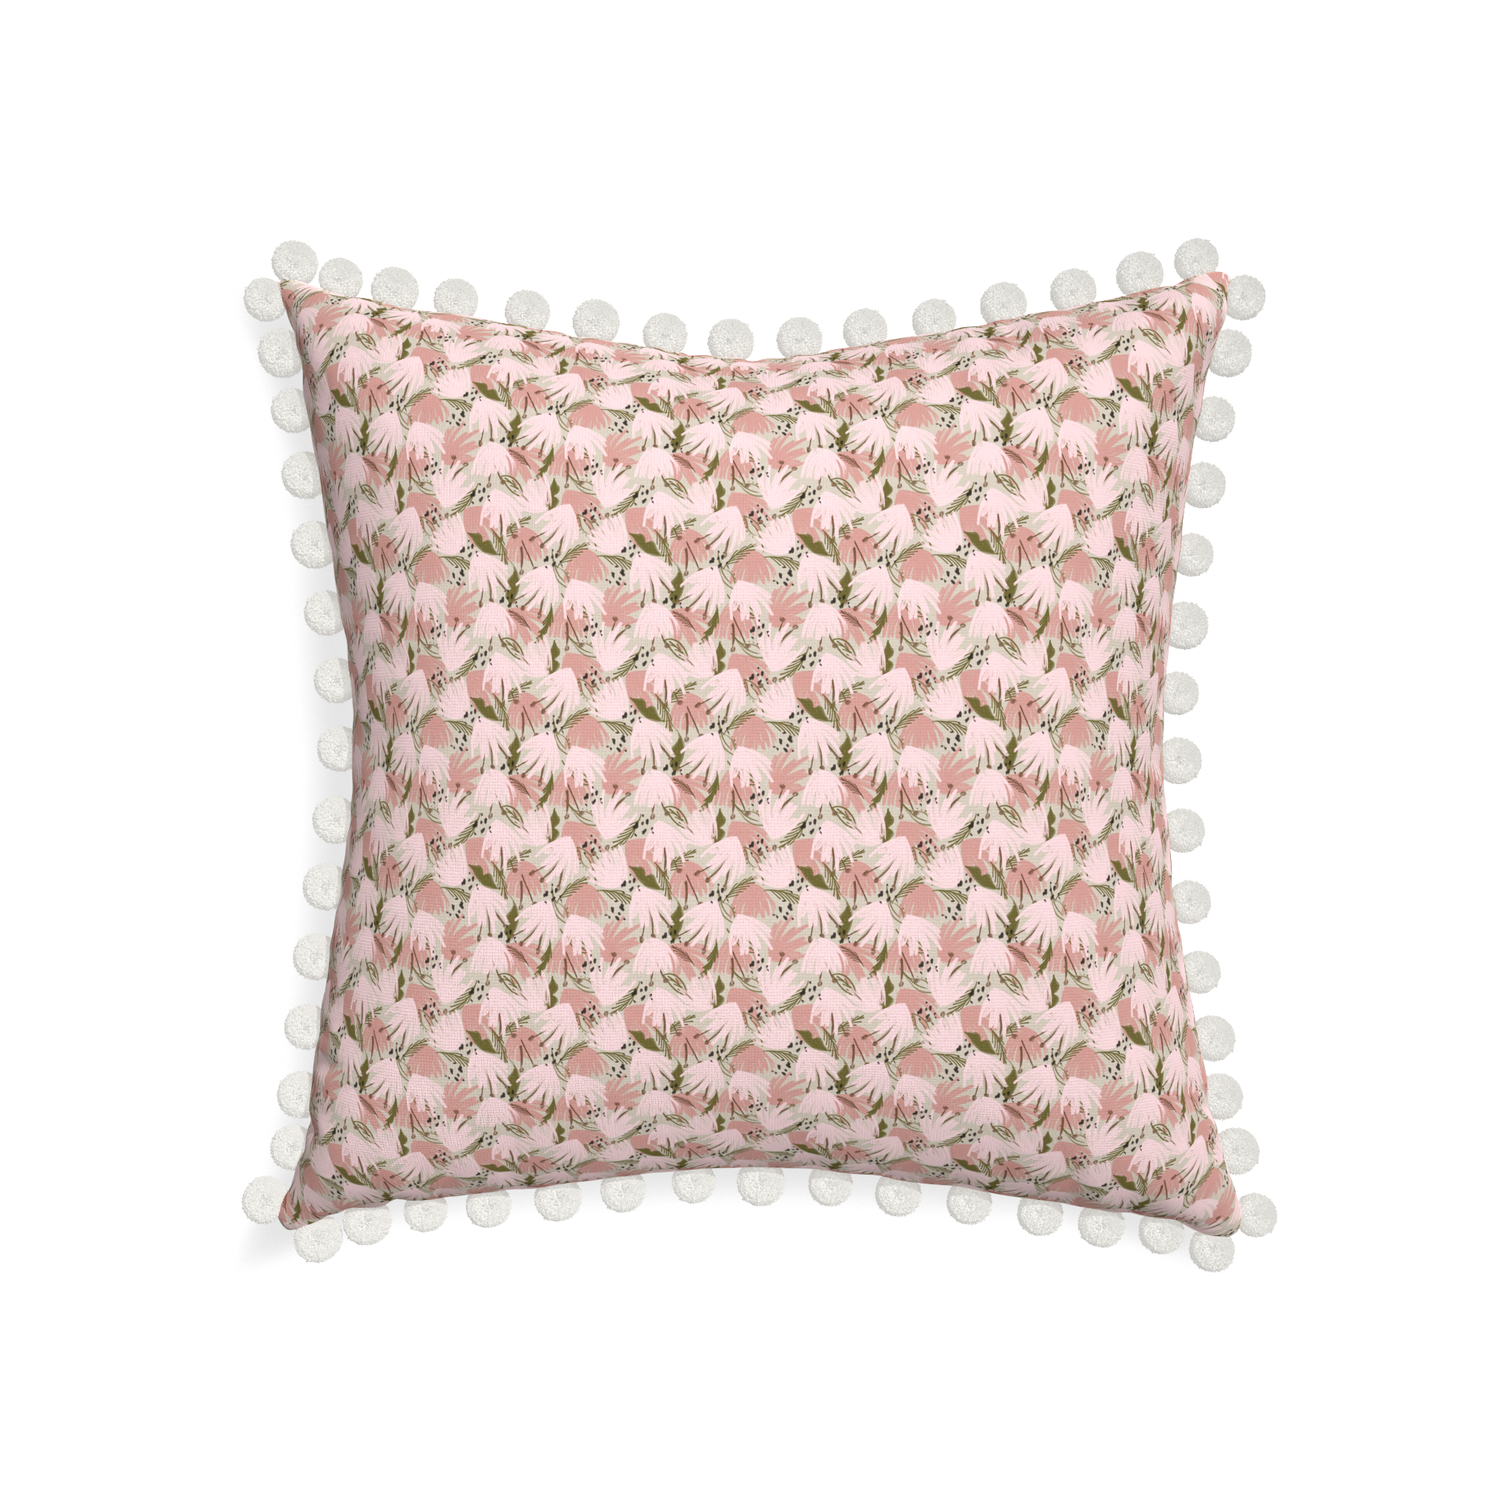 22-square eden pink custom pillow with snow pom pom on white background